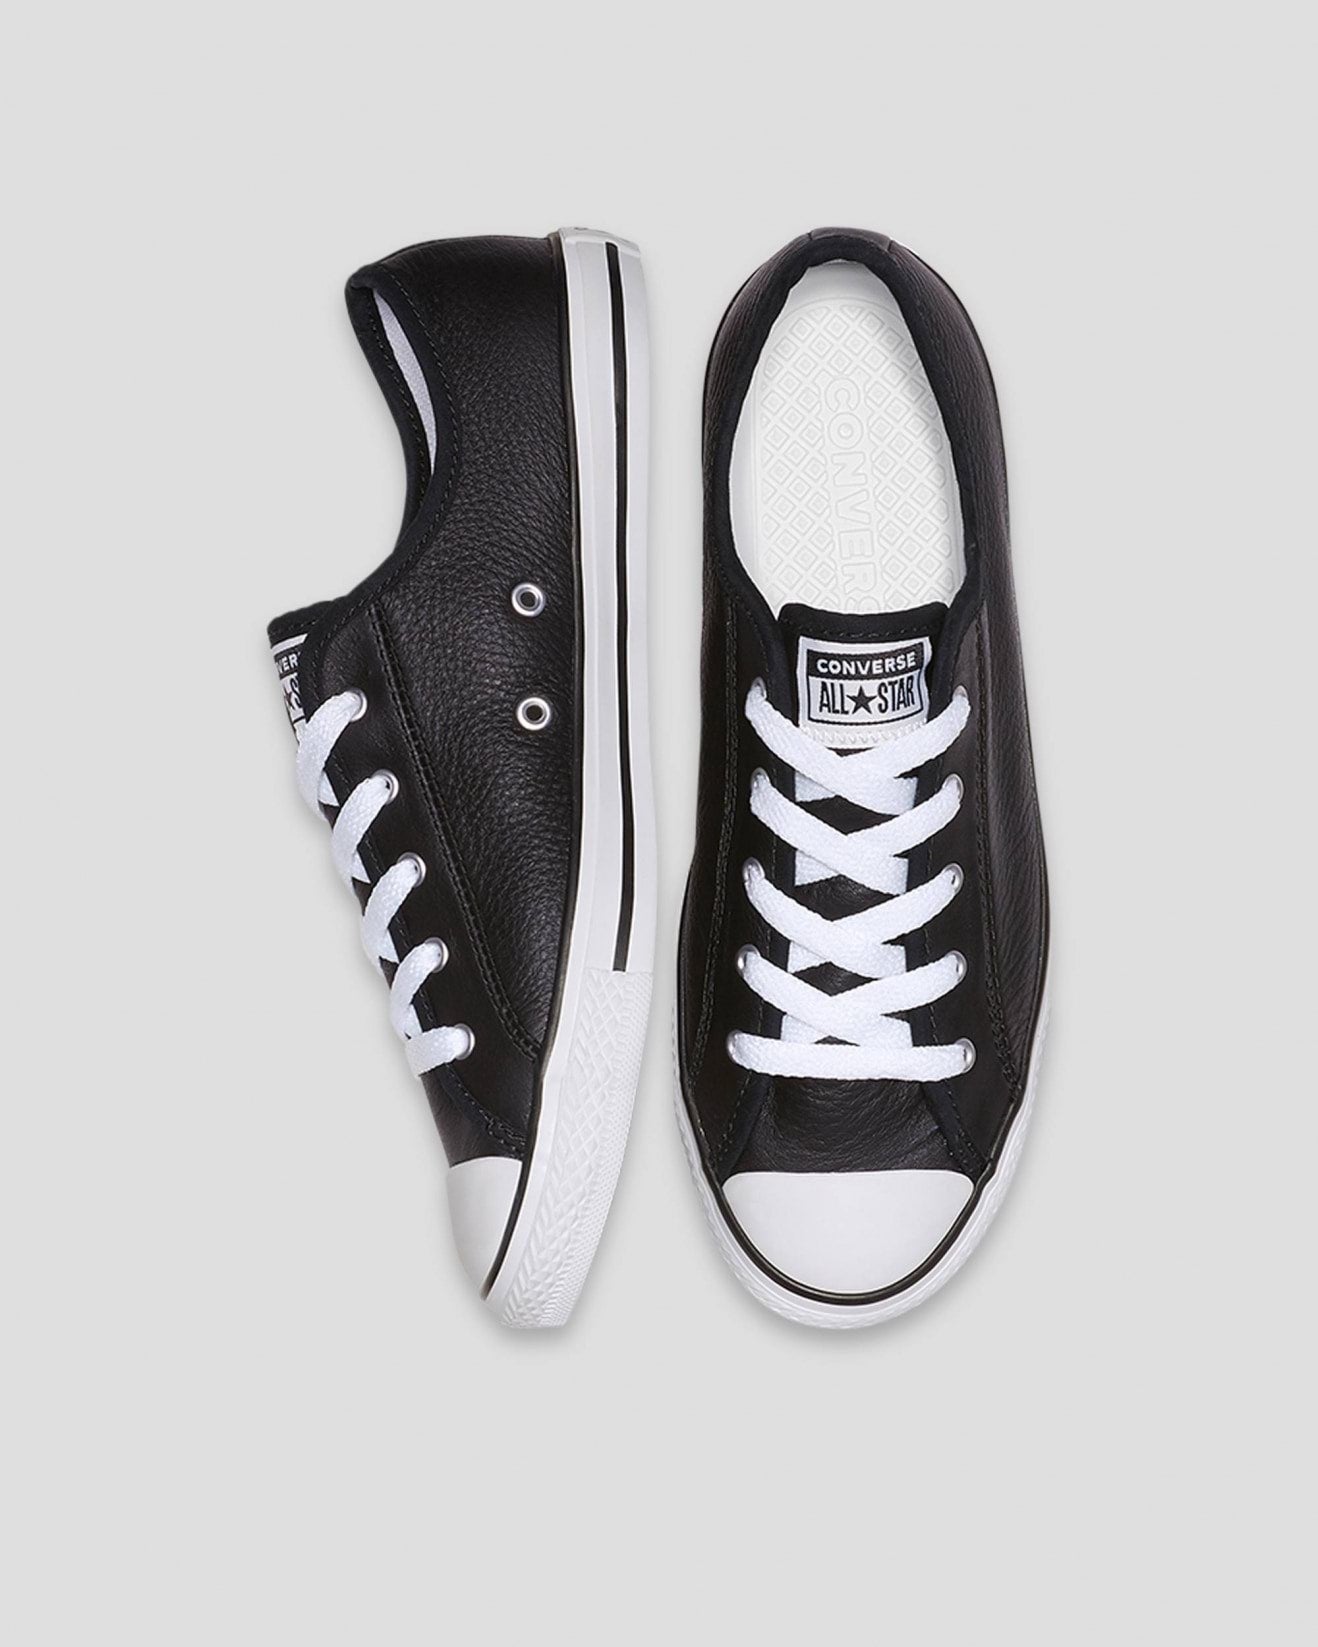 CONVERSE Chuck Taylor All Star Womens Leather Dainty Shoe - Black/White/White - VENUE.